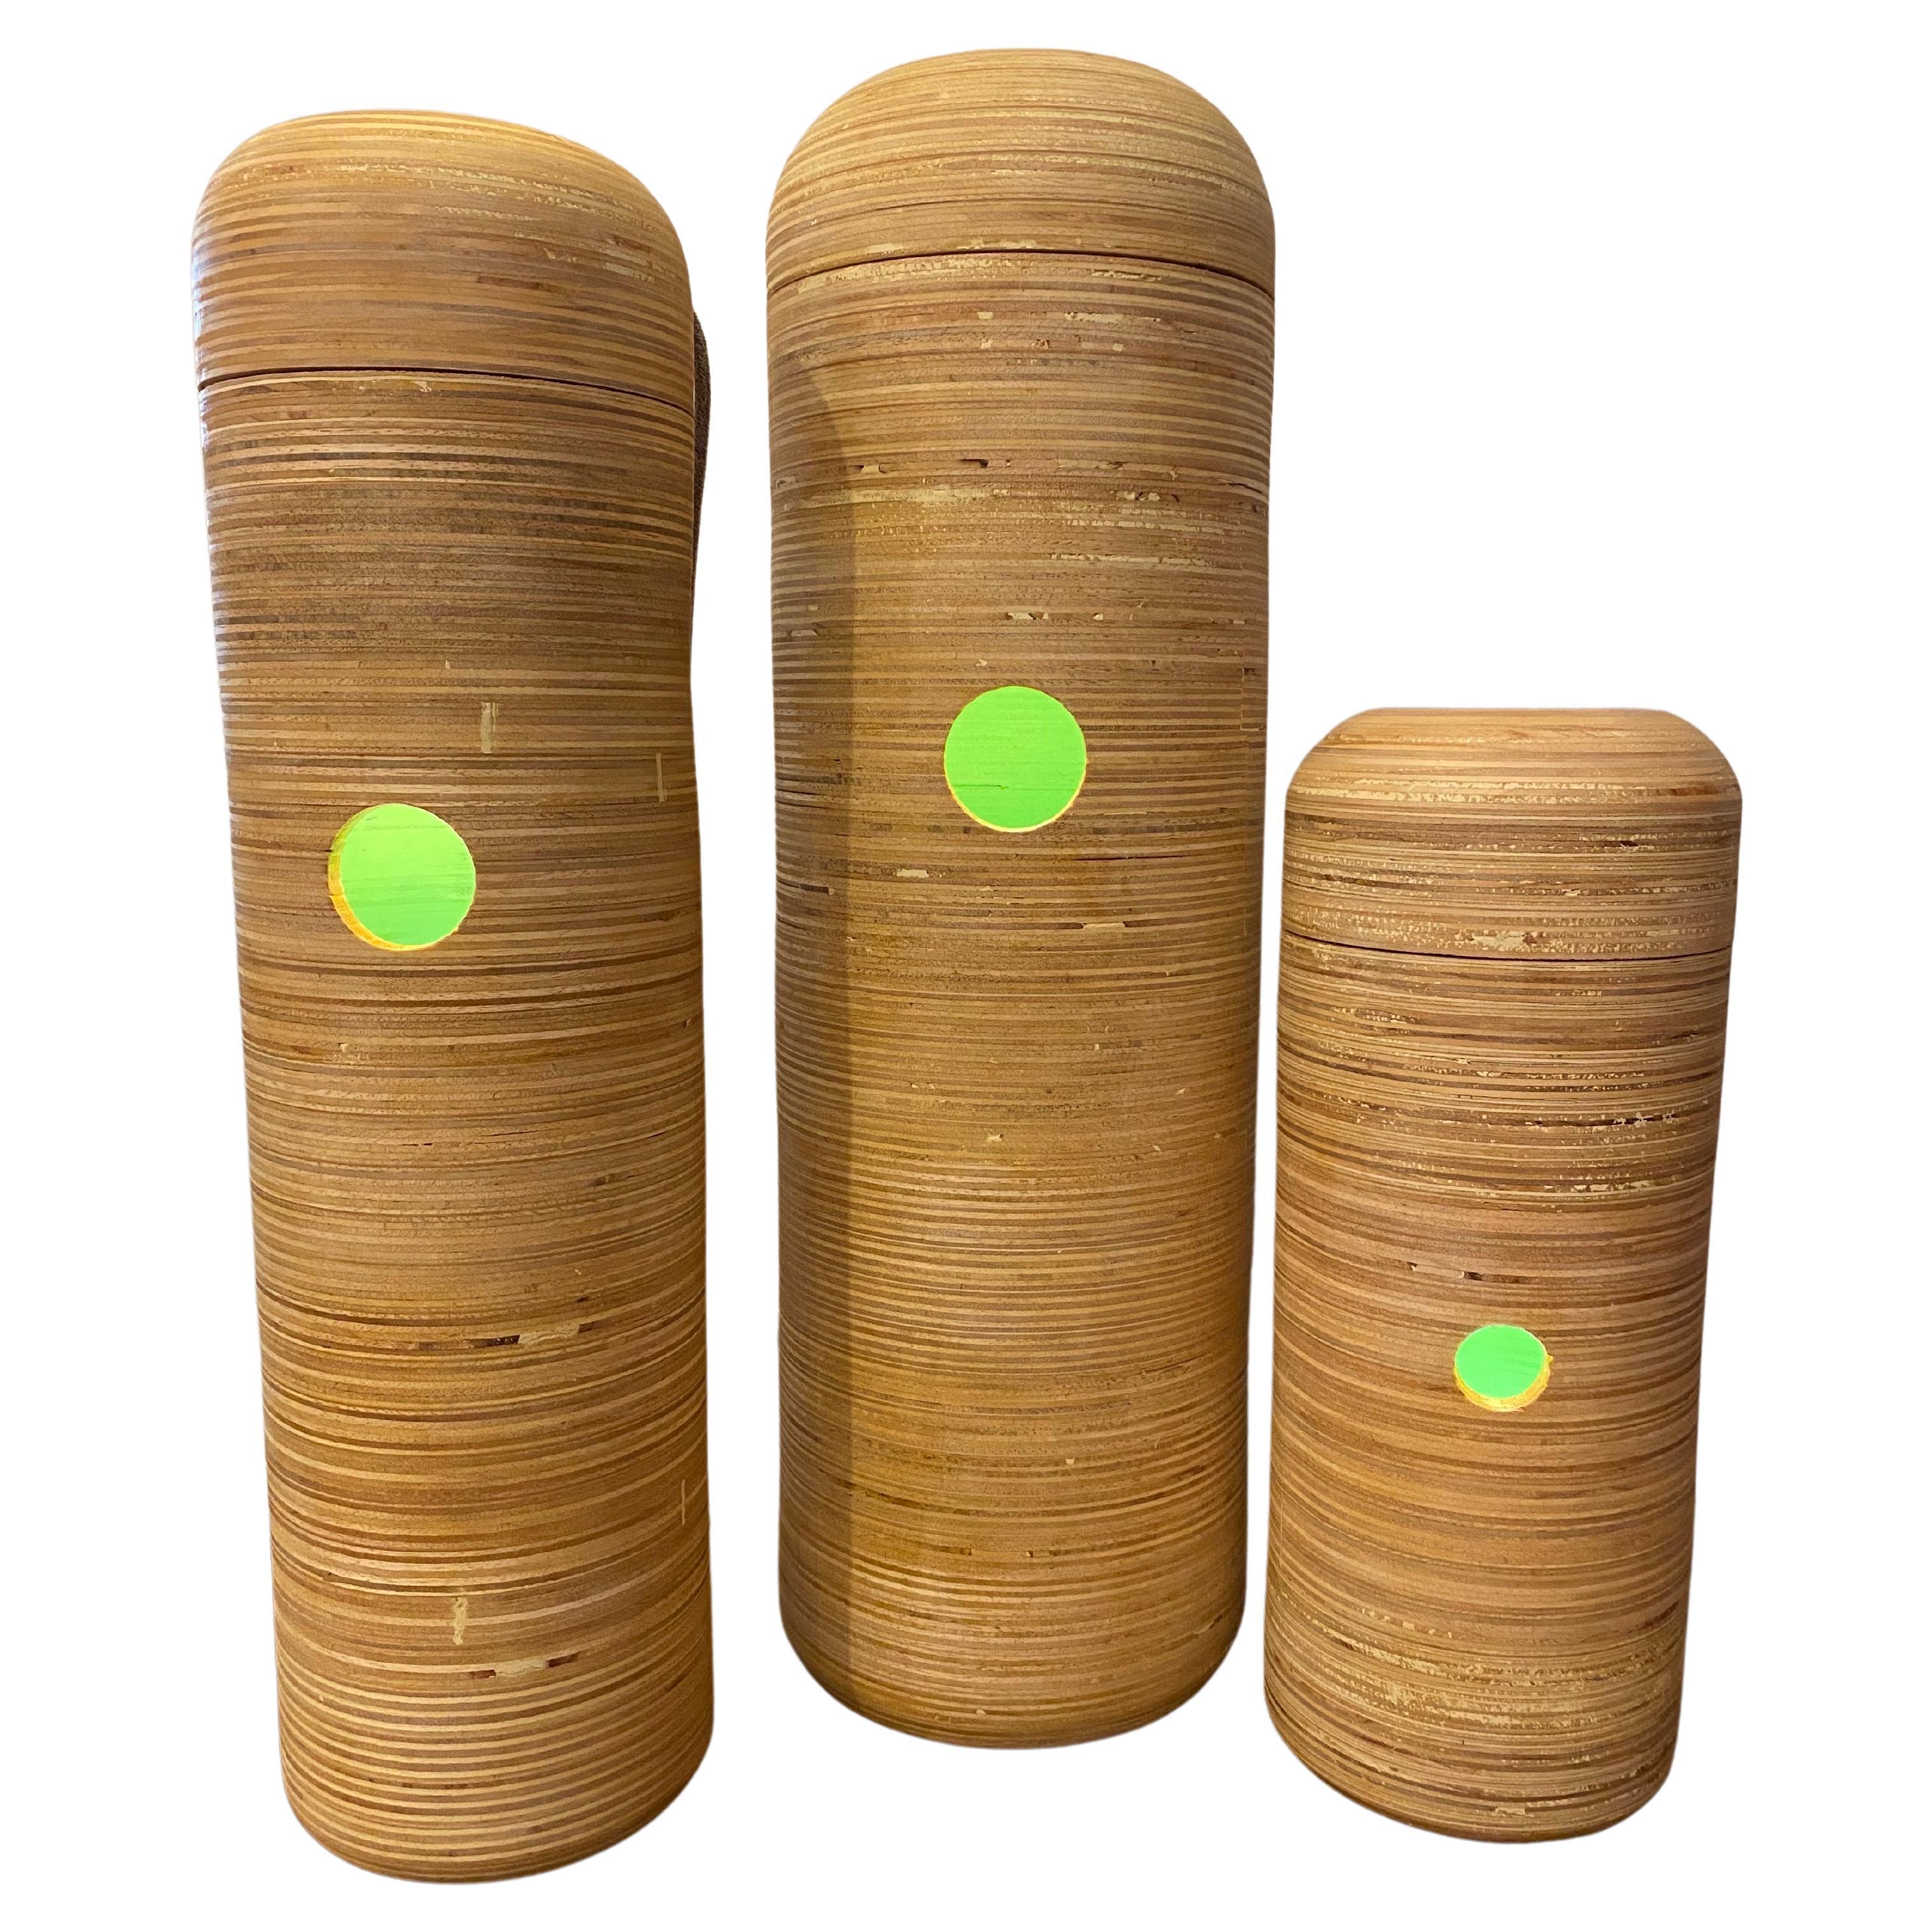 Nate Hill Totem Lamps: columnar lamps with round hole For Sale